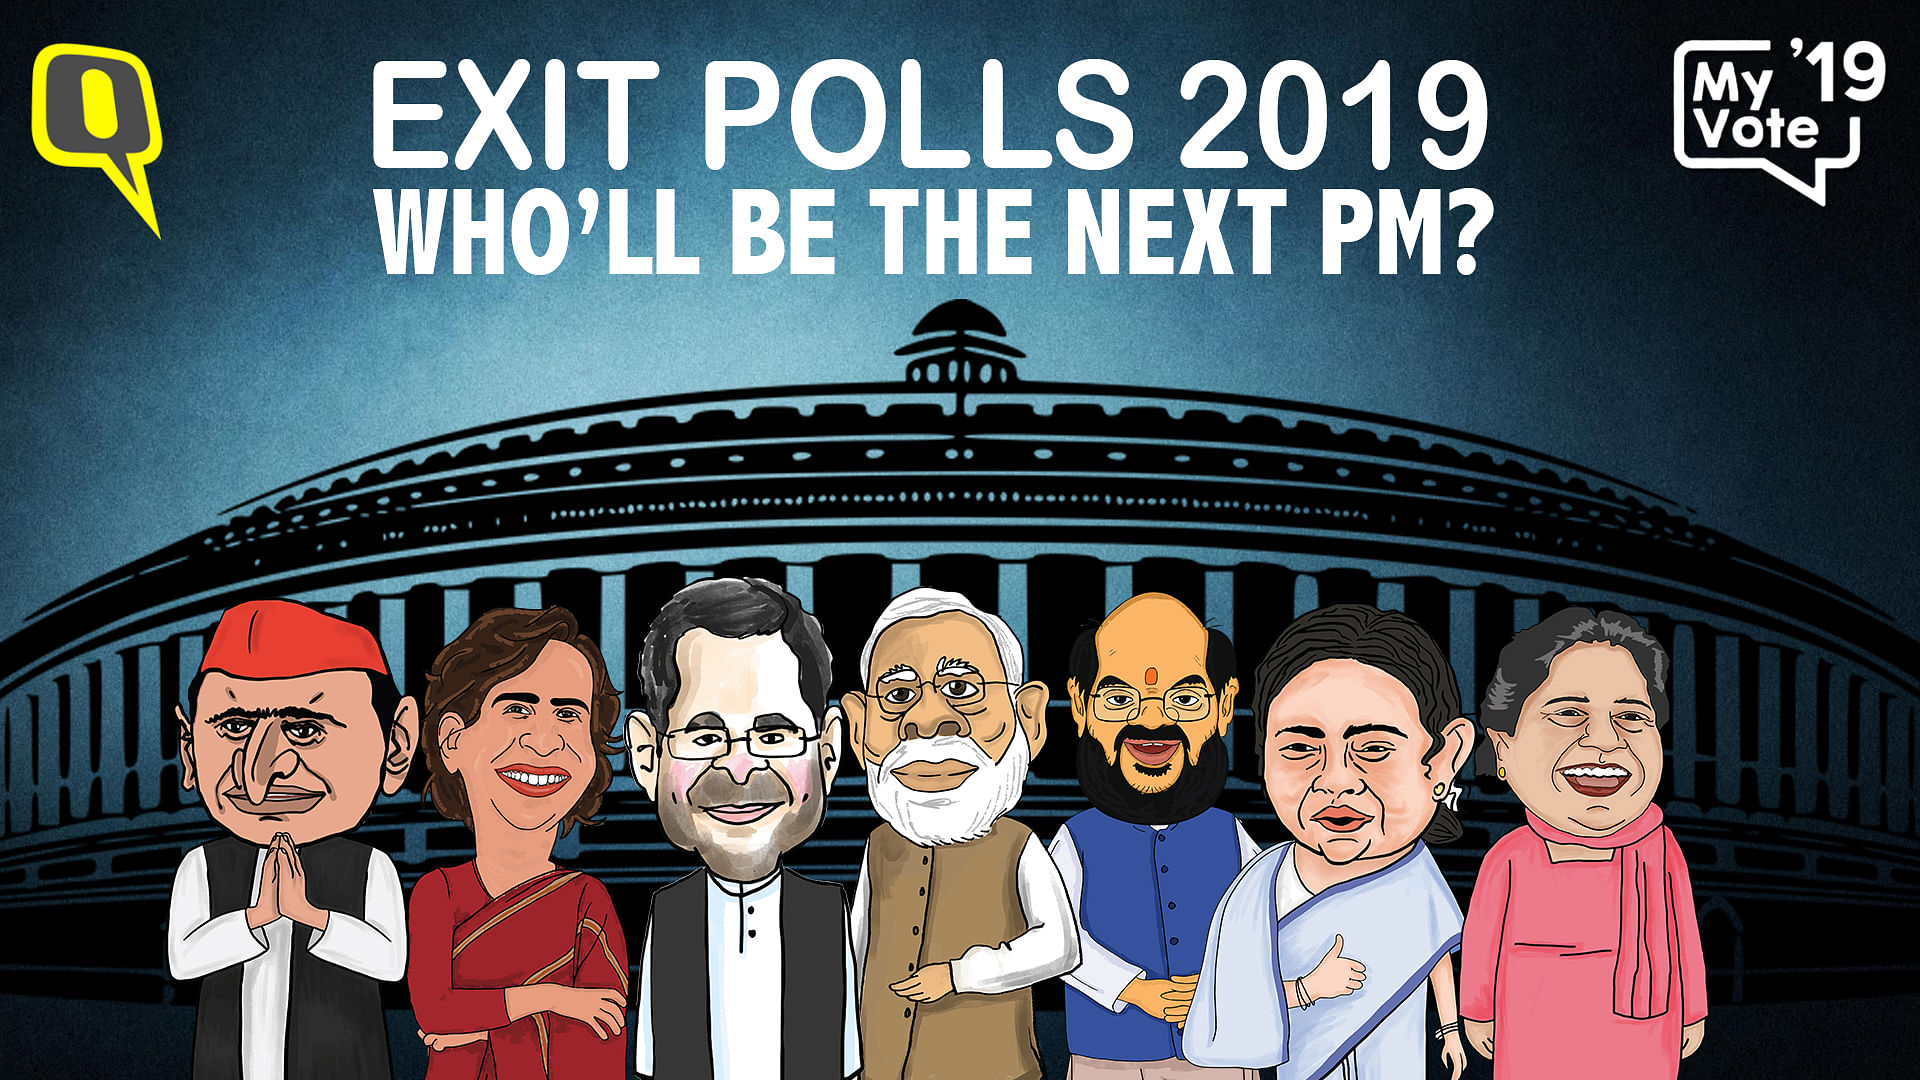 Most exit polls predicted Narendra Modi to be back as the Prime Minister of India on 23 May.